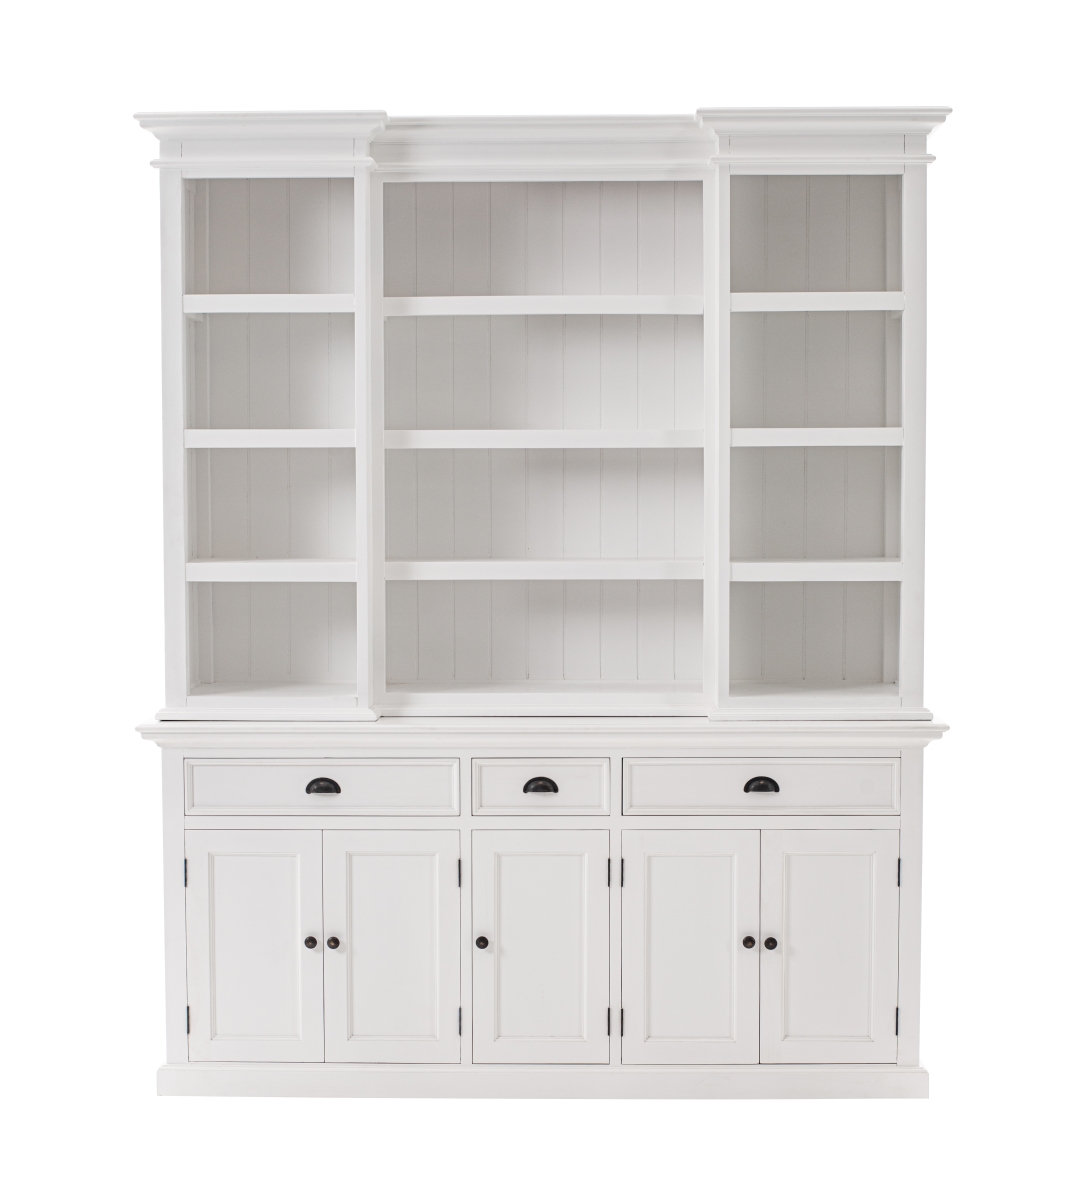 Bca605 Kitchen Hutch Cabinet With 5 Doors & 3 Drawers